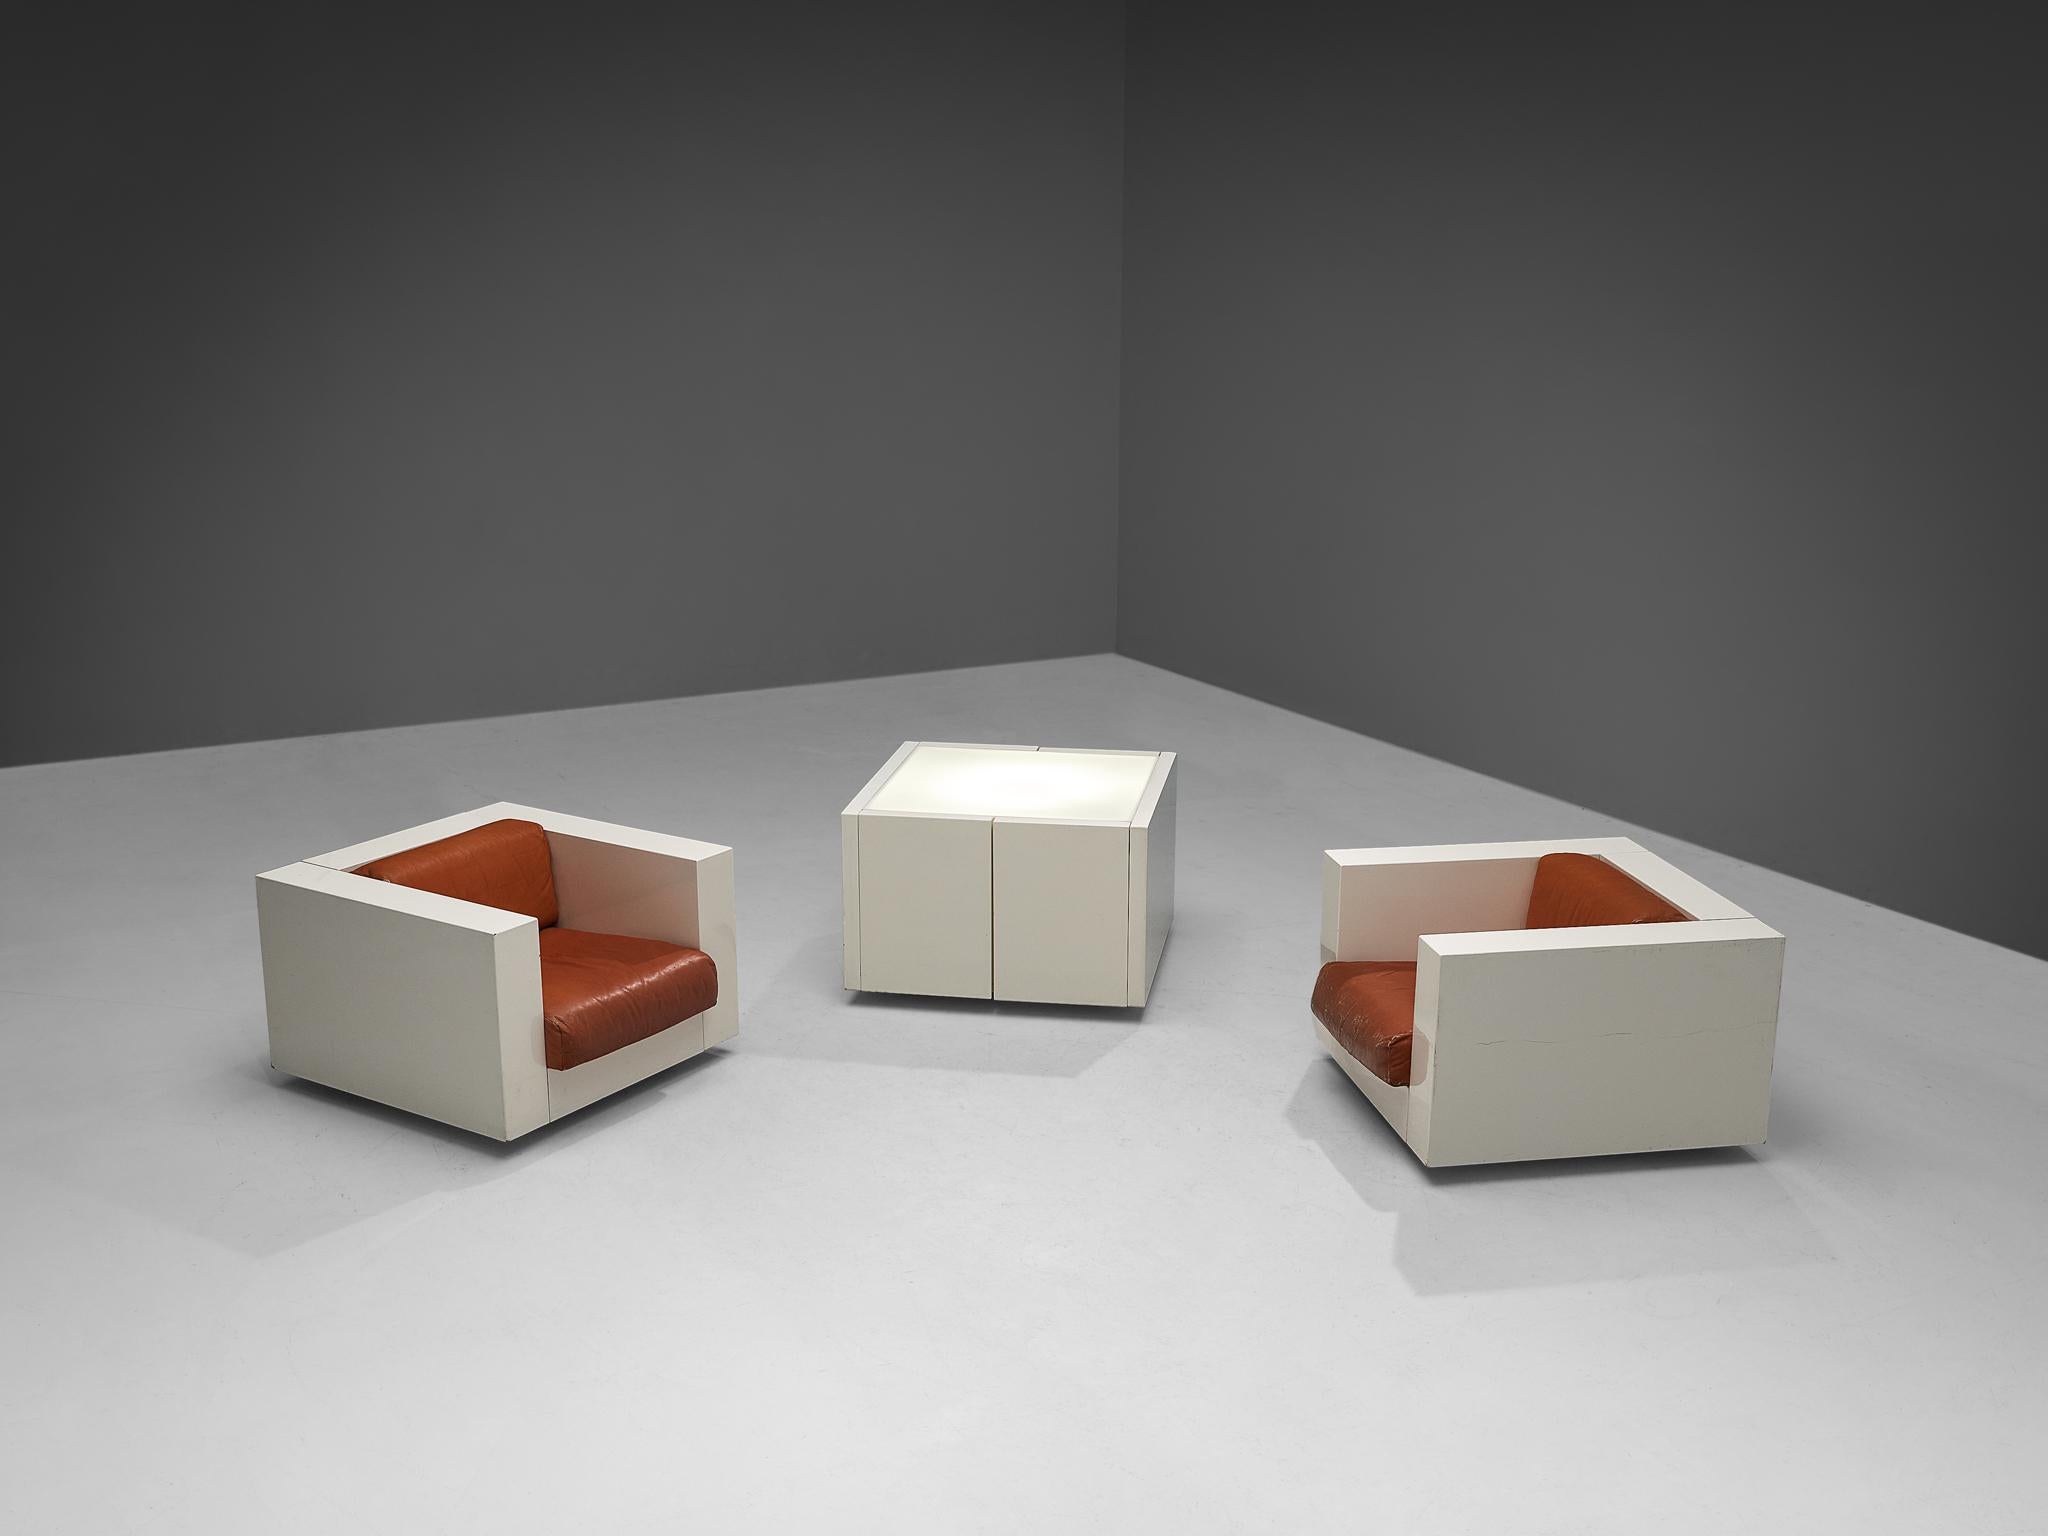 Massimo and Lella Vignelli for Poltronova, set of 'Saratoga' lounge chairs and light table / cabinet, polyester lacquer, leather, Italy, 1964 

This set of two lounge chairs and a table is introduced as 'Saratoga'.  The combination of the two pieces